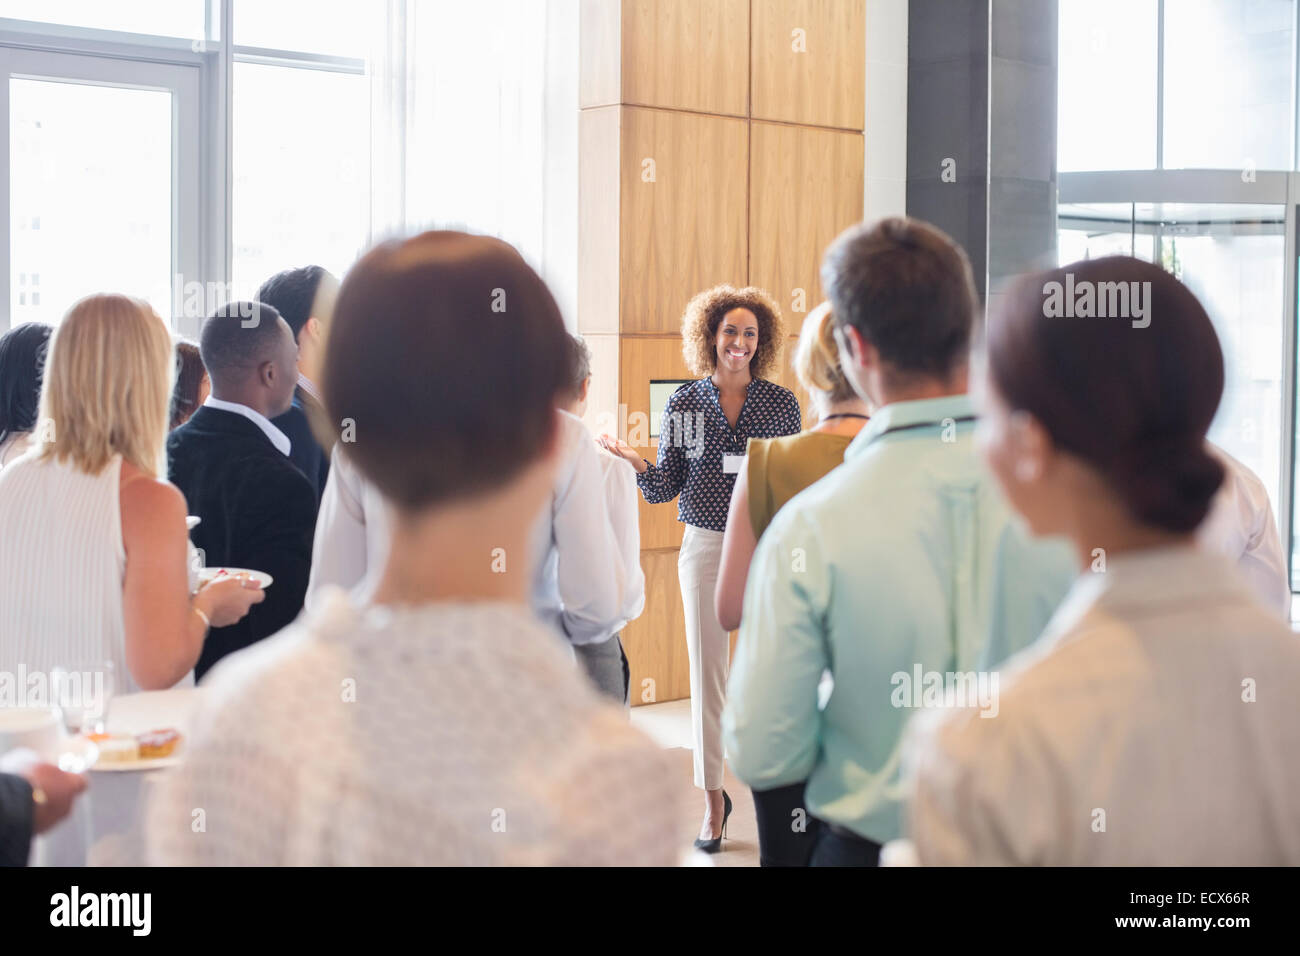 Business people standing in office hall holding trays with cakes and drinking water Stock Photo